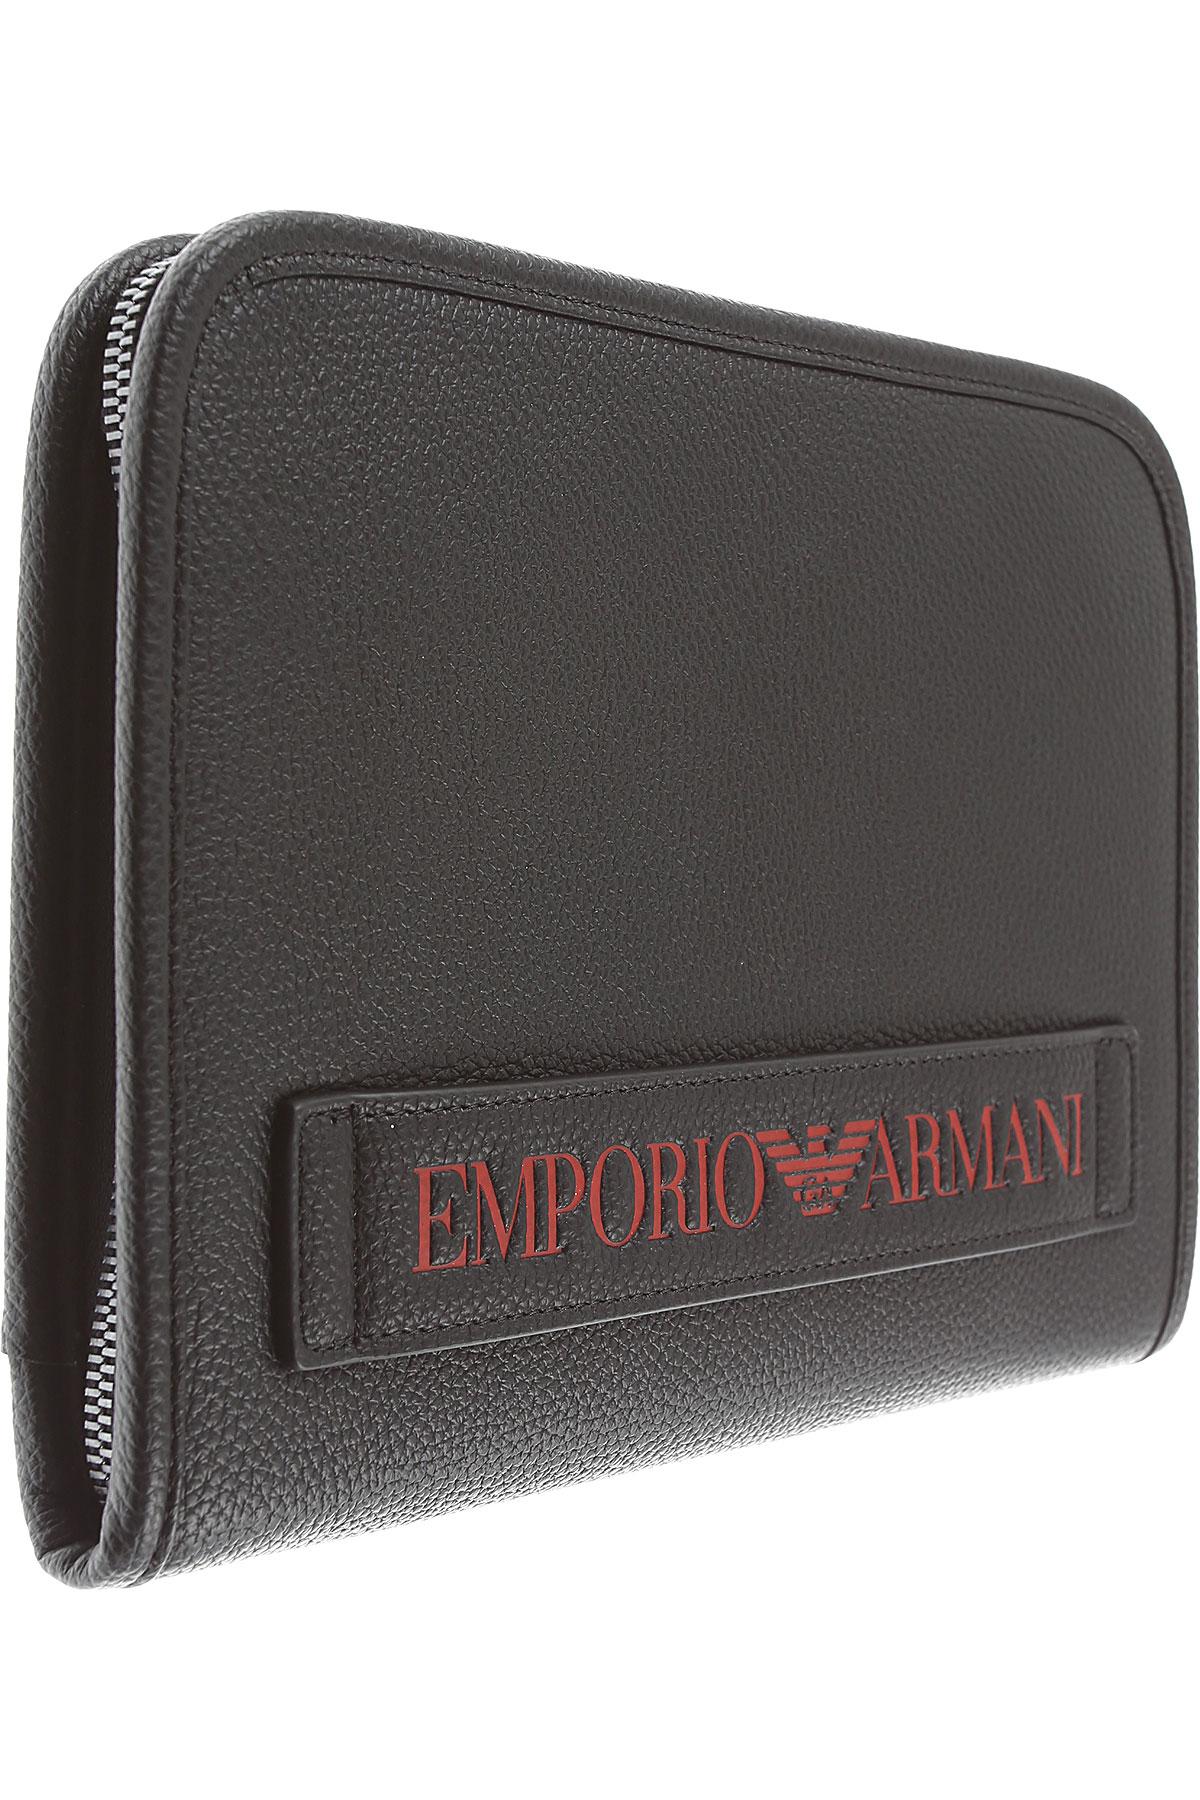 Emporio Armani Leather Wallet For Men On Sale in Black for Men - Lyst